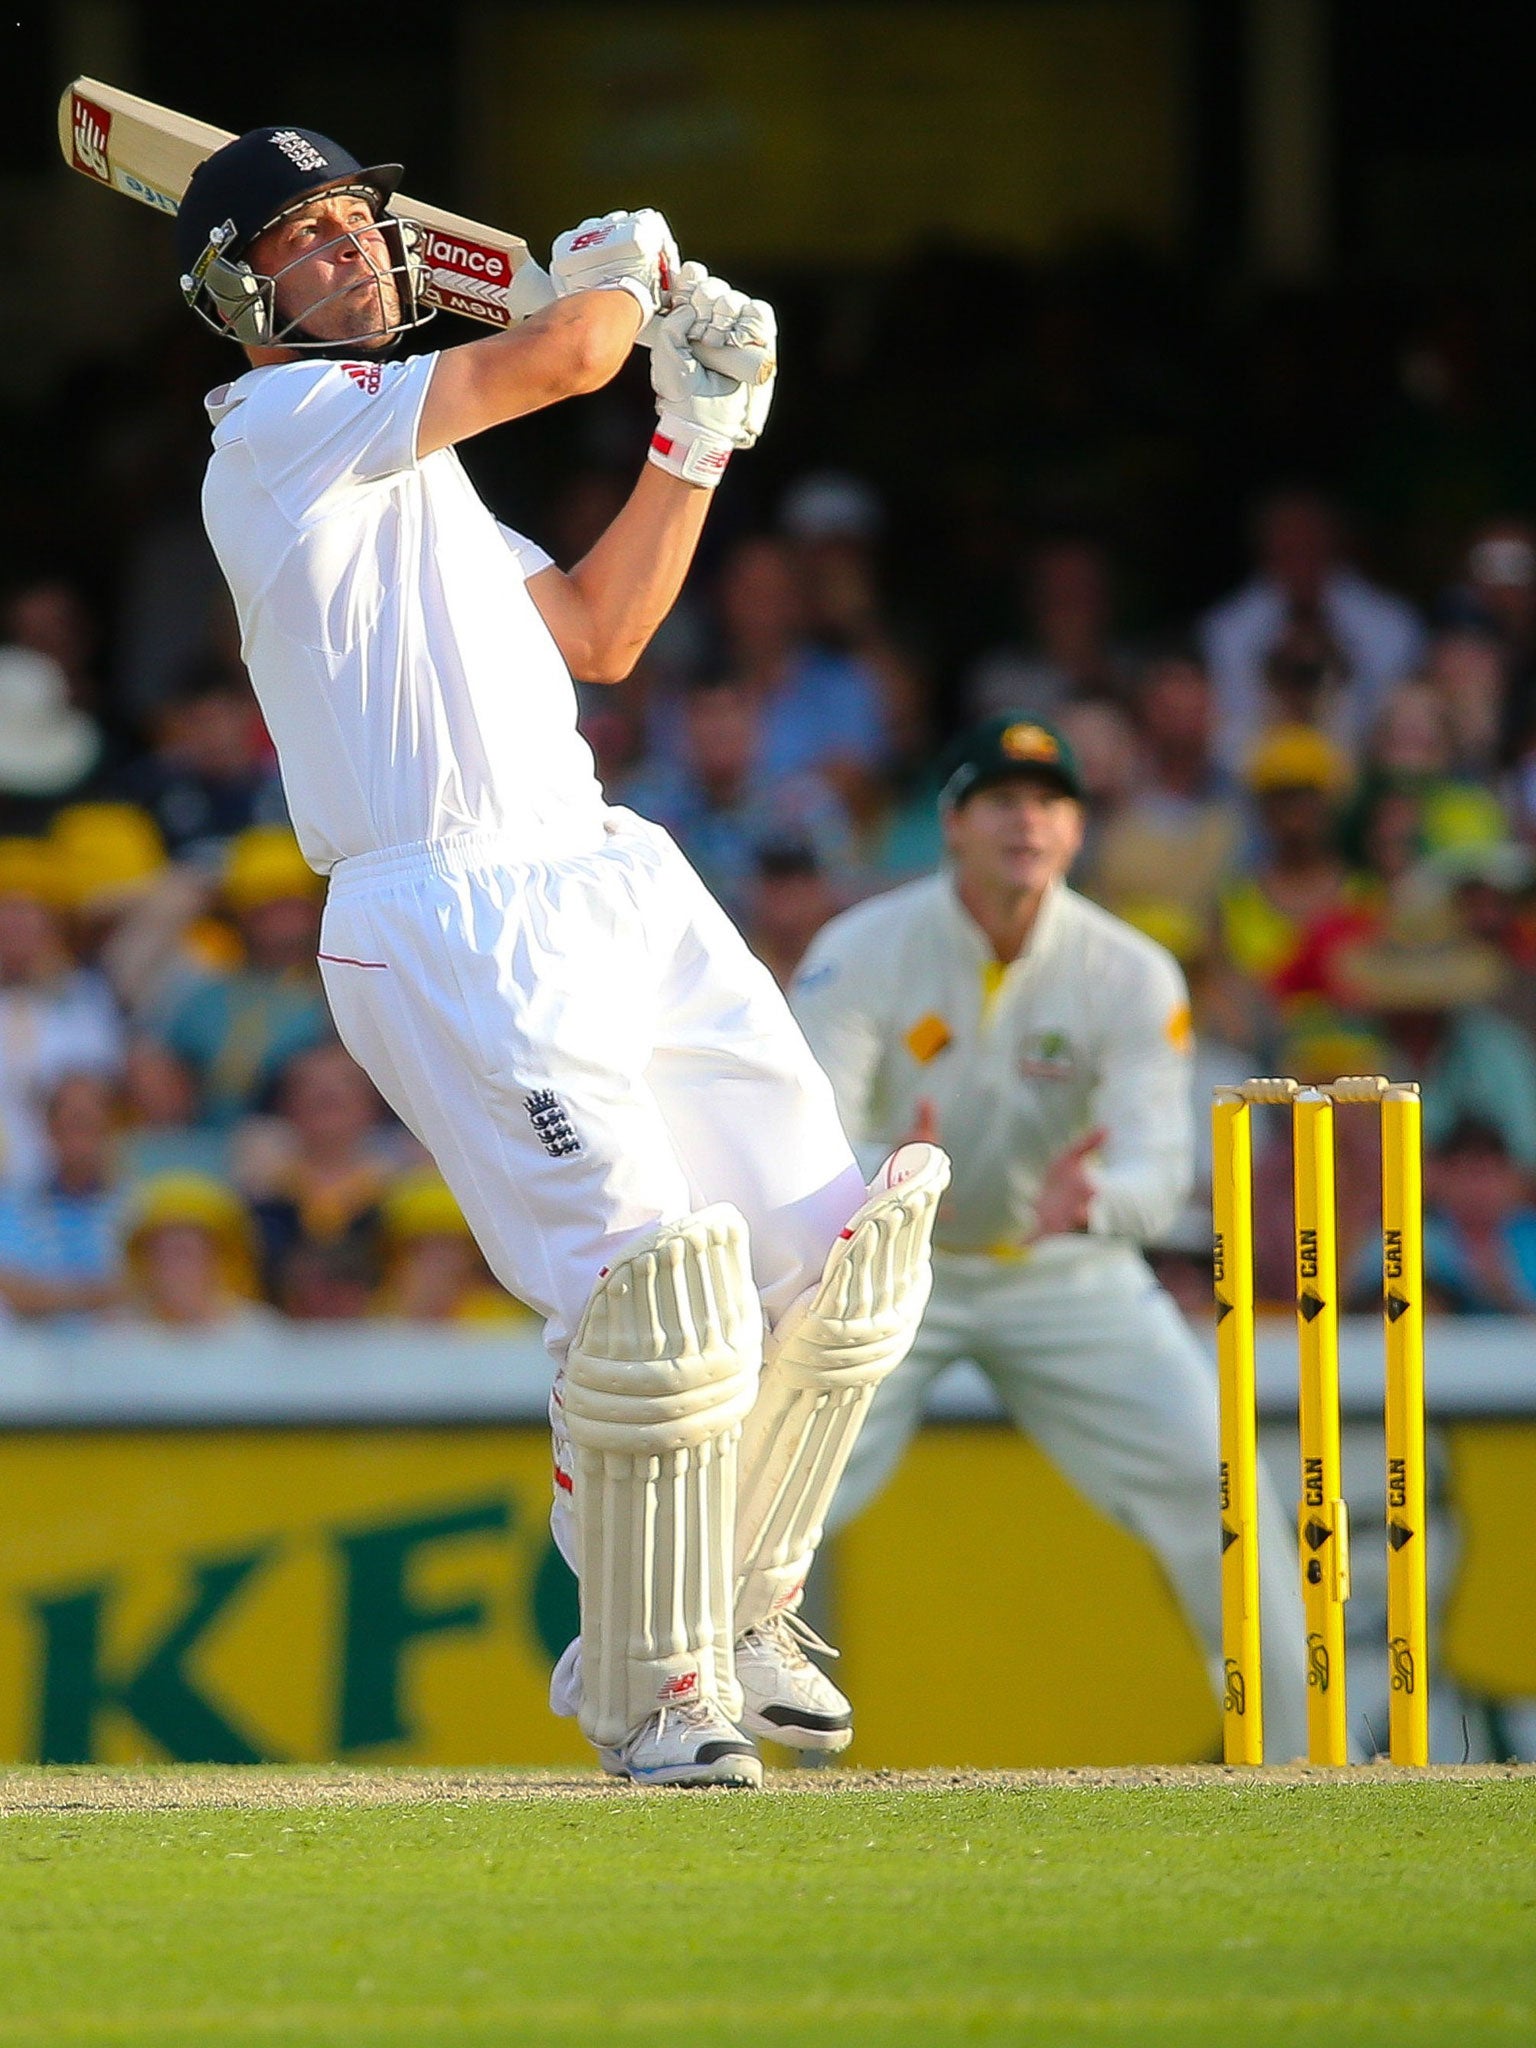 Jonathan Trott fails to keep his hook shot down and is caught in the deep during the first Test